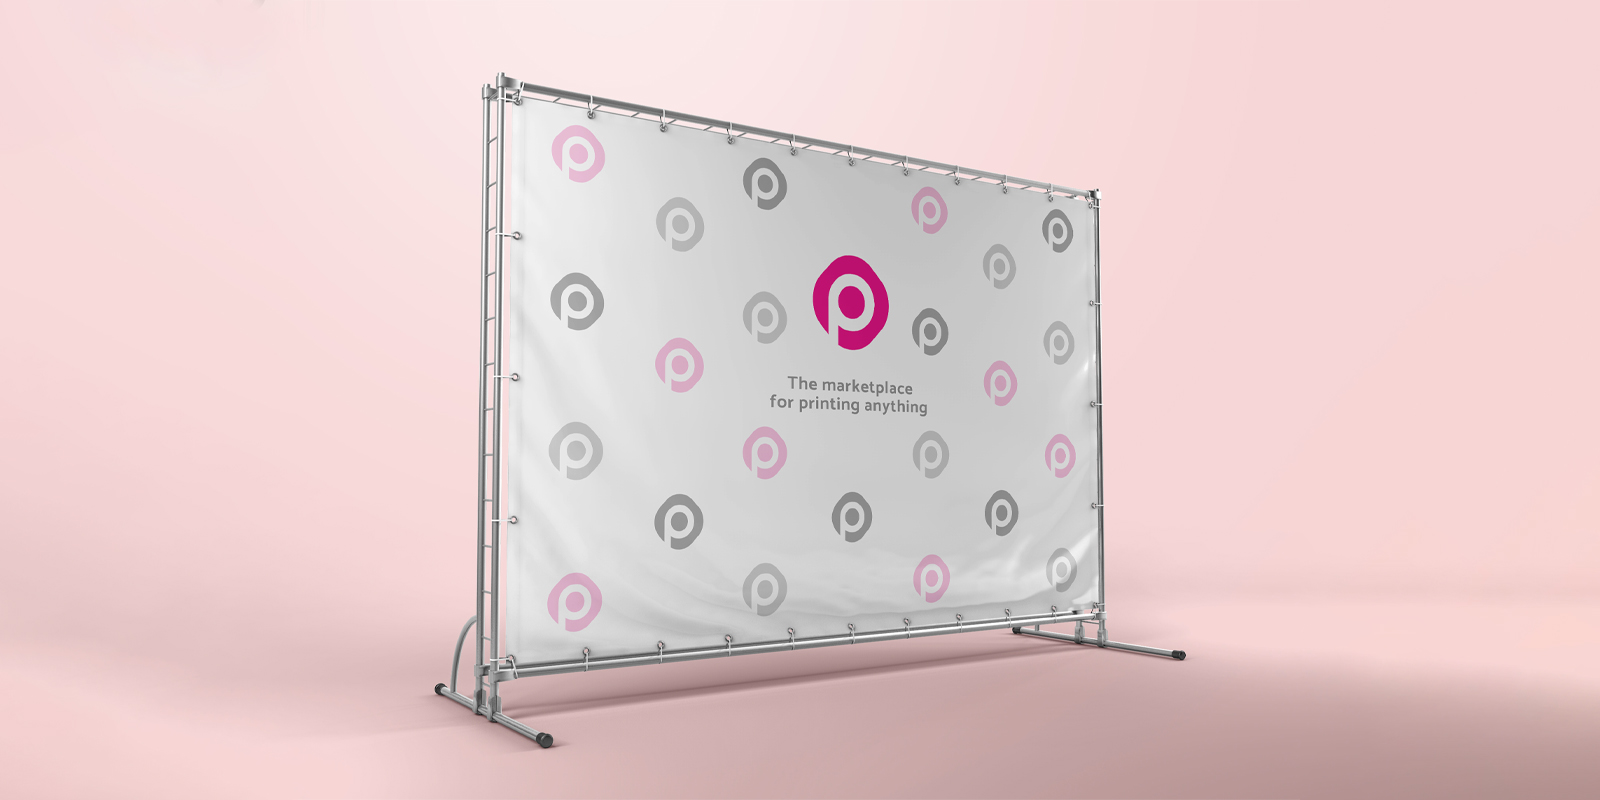 Backdrop banners in Melbourne - Print with Pagerr